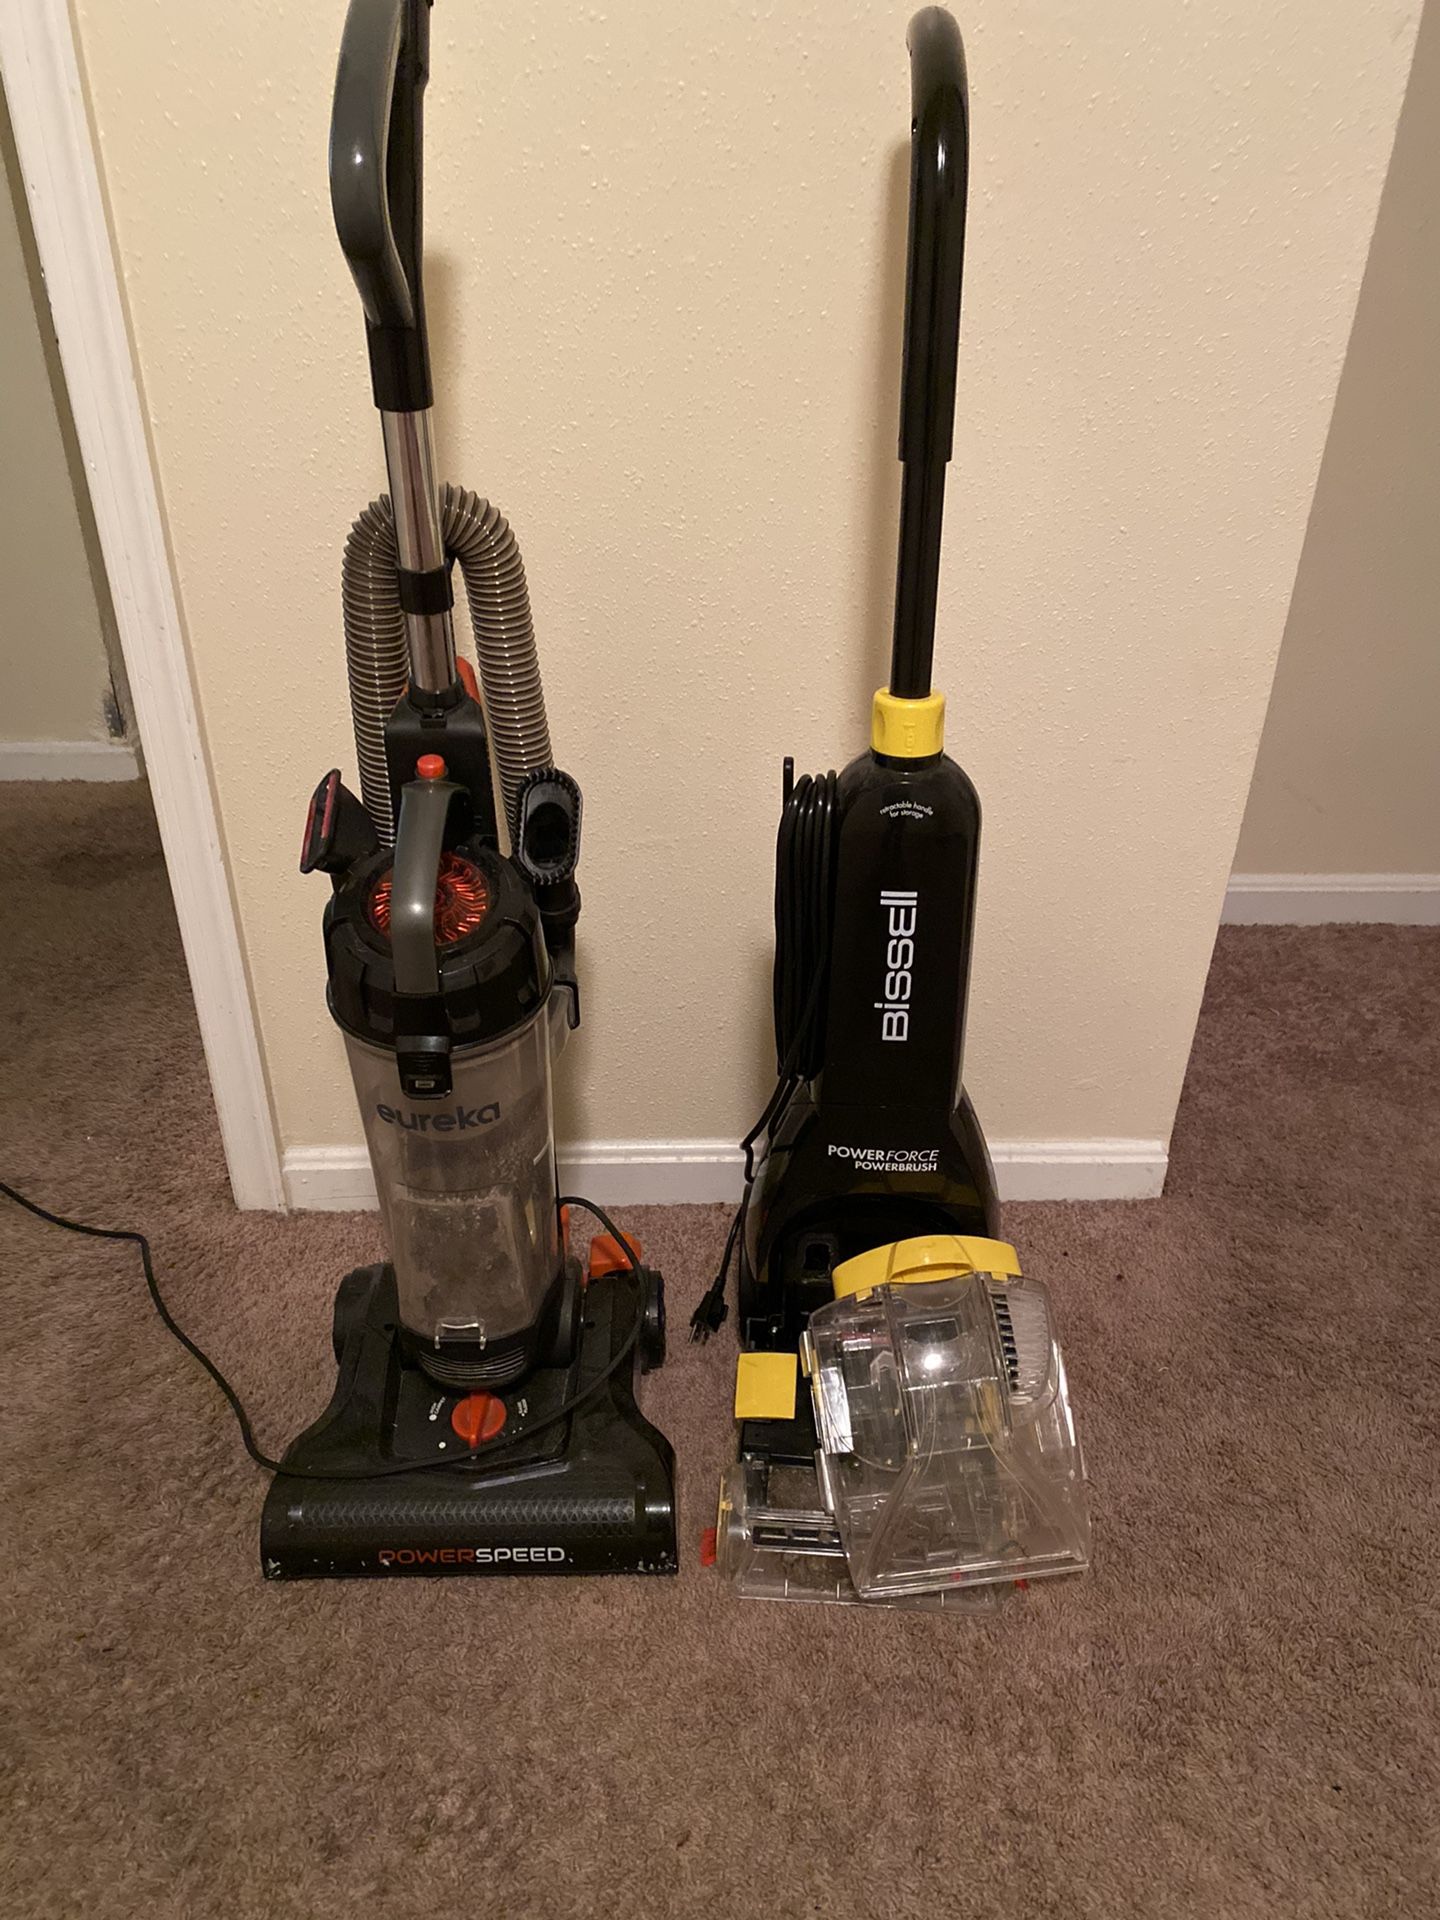 Vacuum and rug cleaner both